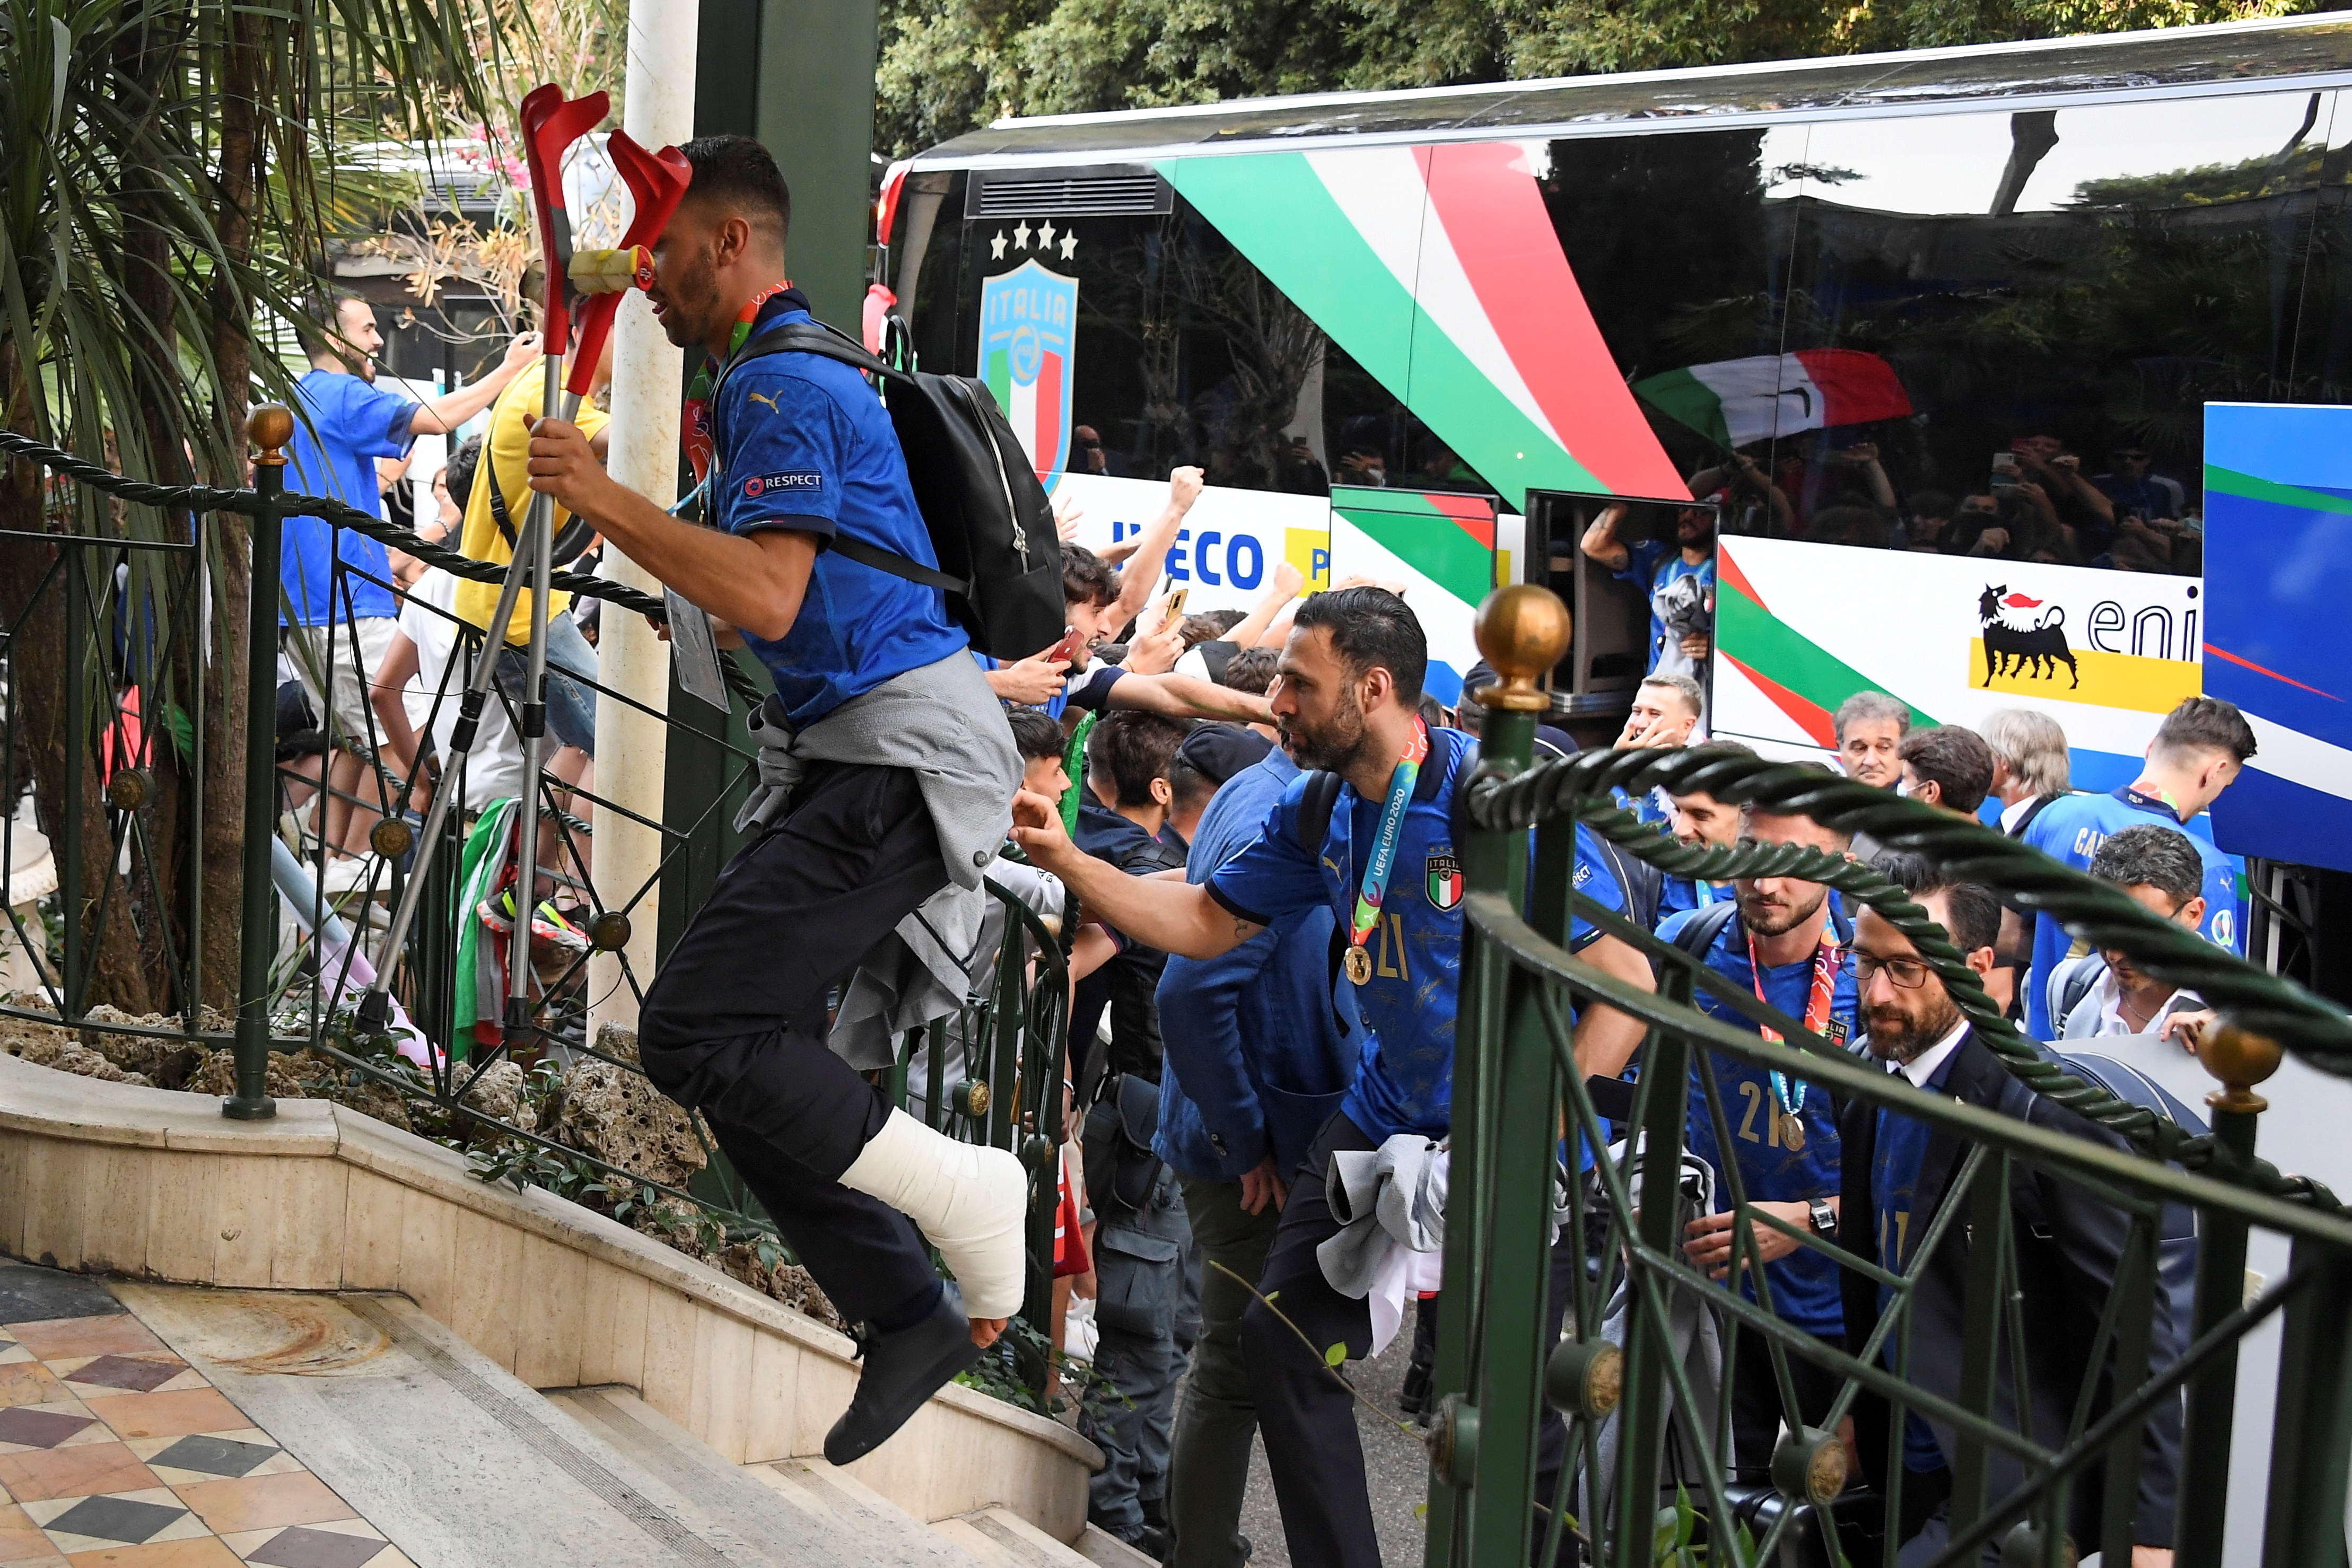 Euro 2020 - Italy's defender Leonardo Spinazzola and other members of the soccer national team arrive at the Parco dei Principi hotel after winning the European Championship. -(REUTERS)